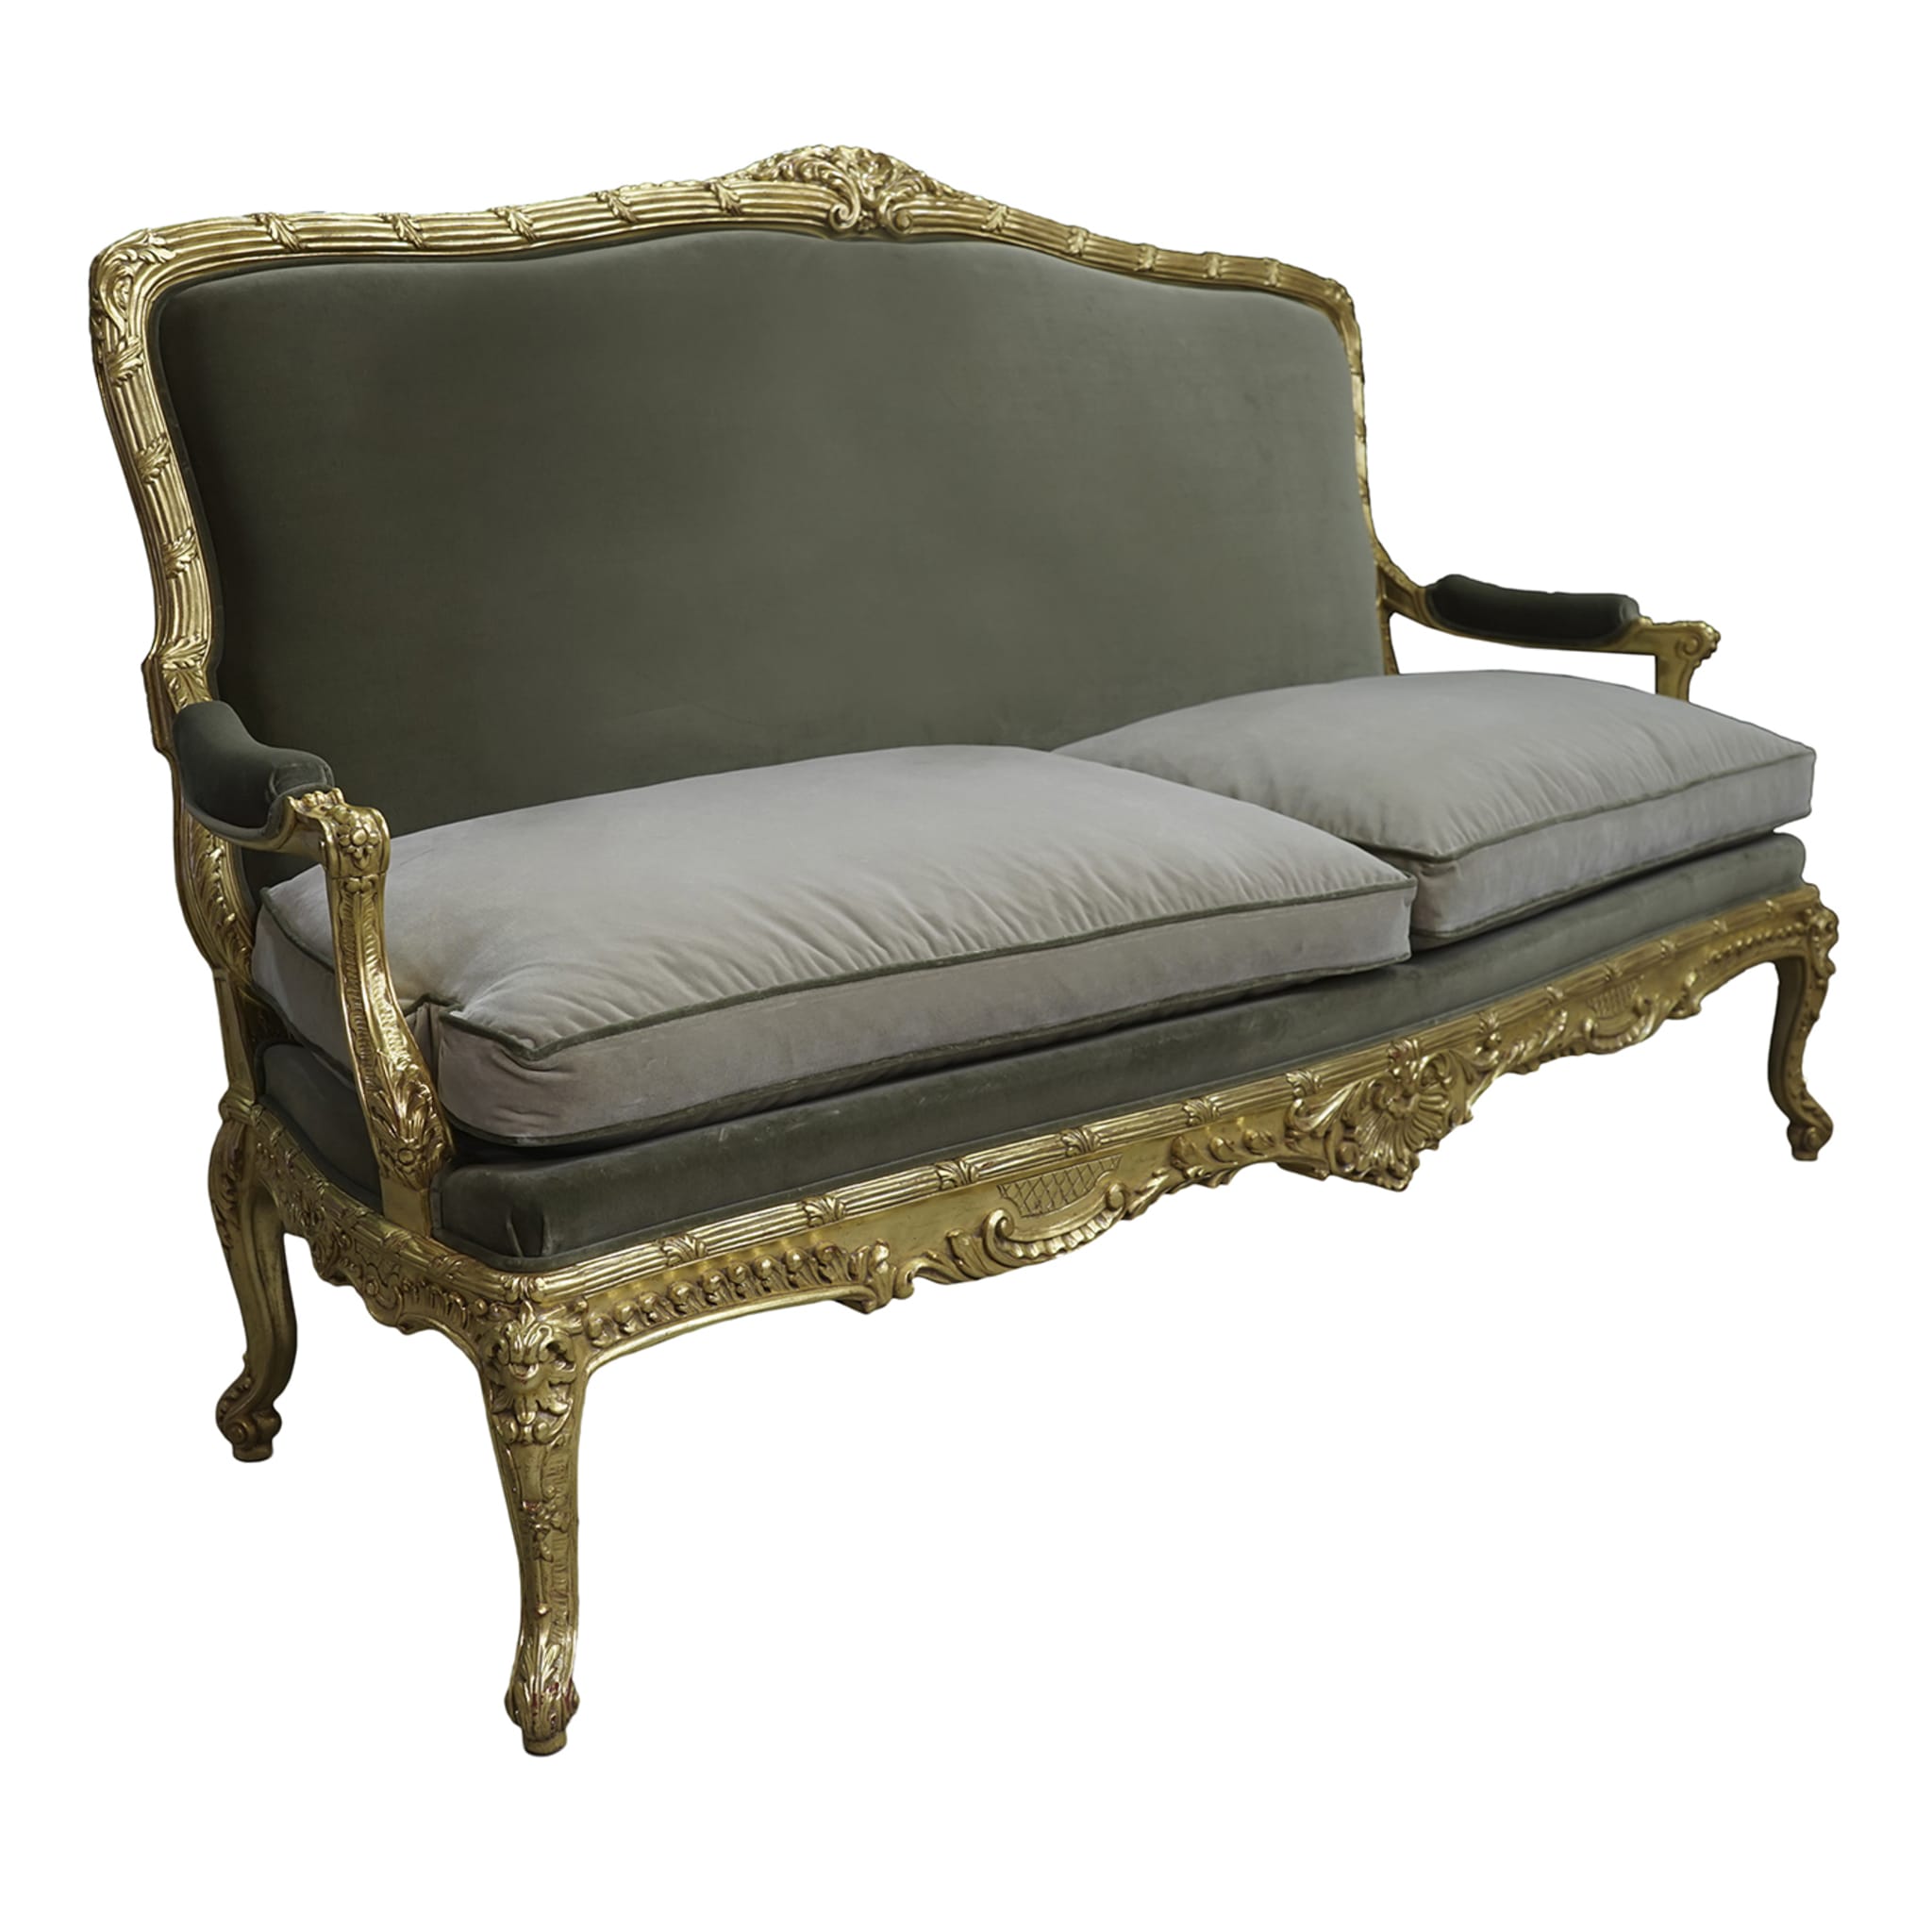 FRENCH TRANSITIONAL STYLE SOFA - Main view